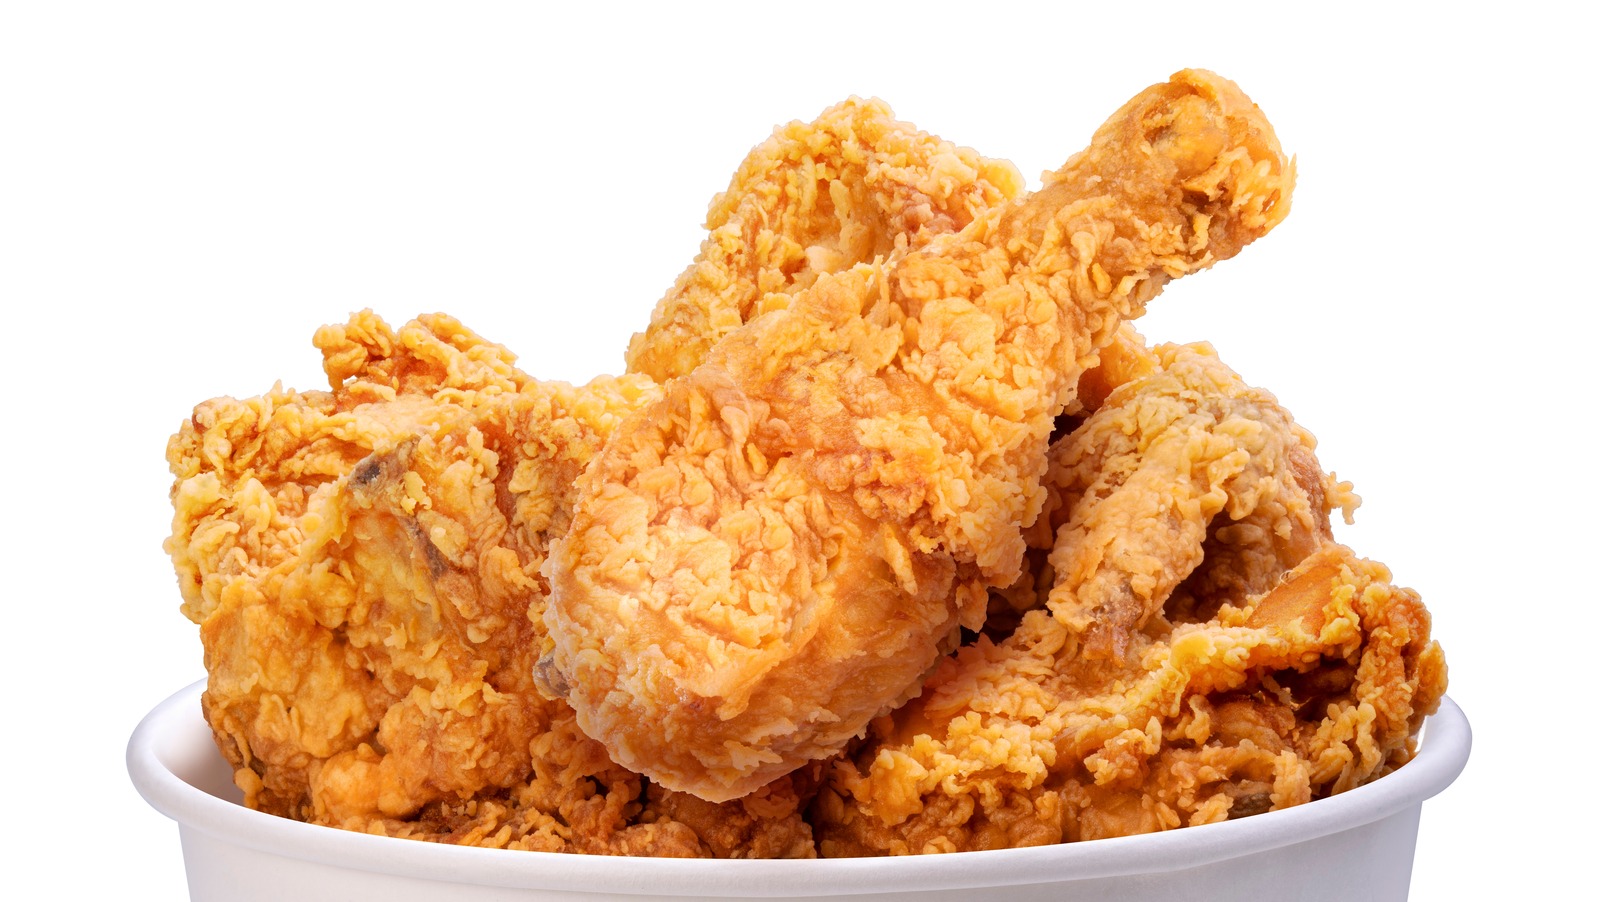 https://www.thedailymeal.com/img/gallery/the-ultimate-ranking-of-the-best-fried-chicken-chains/l-intro-1659368501.jpg